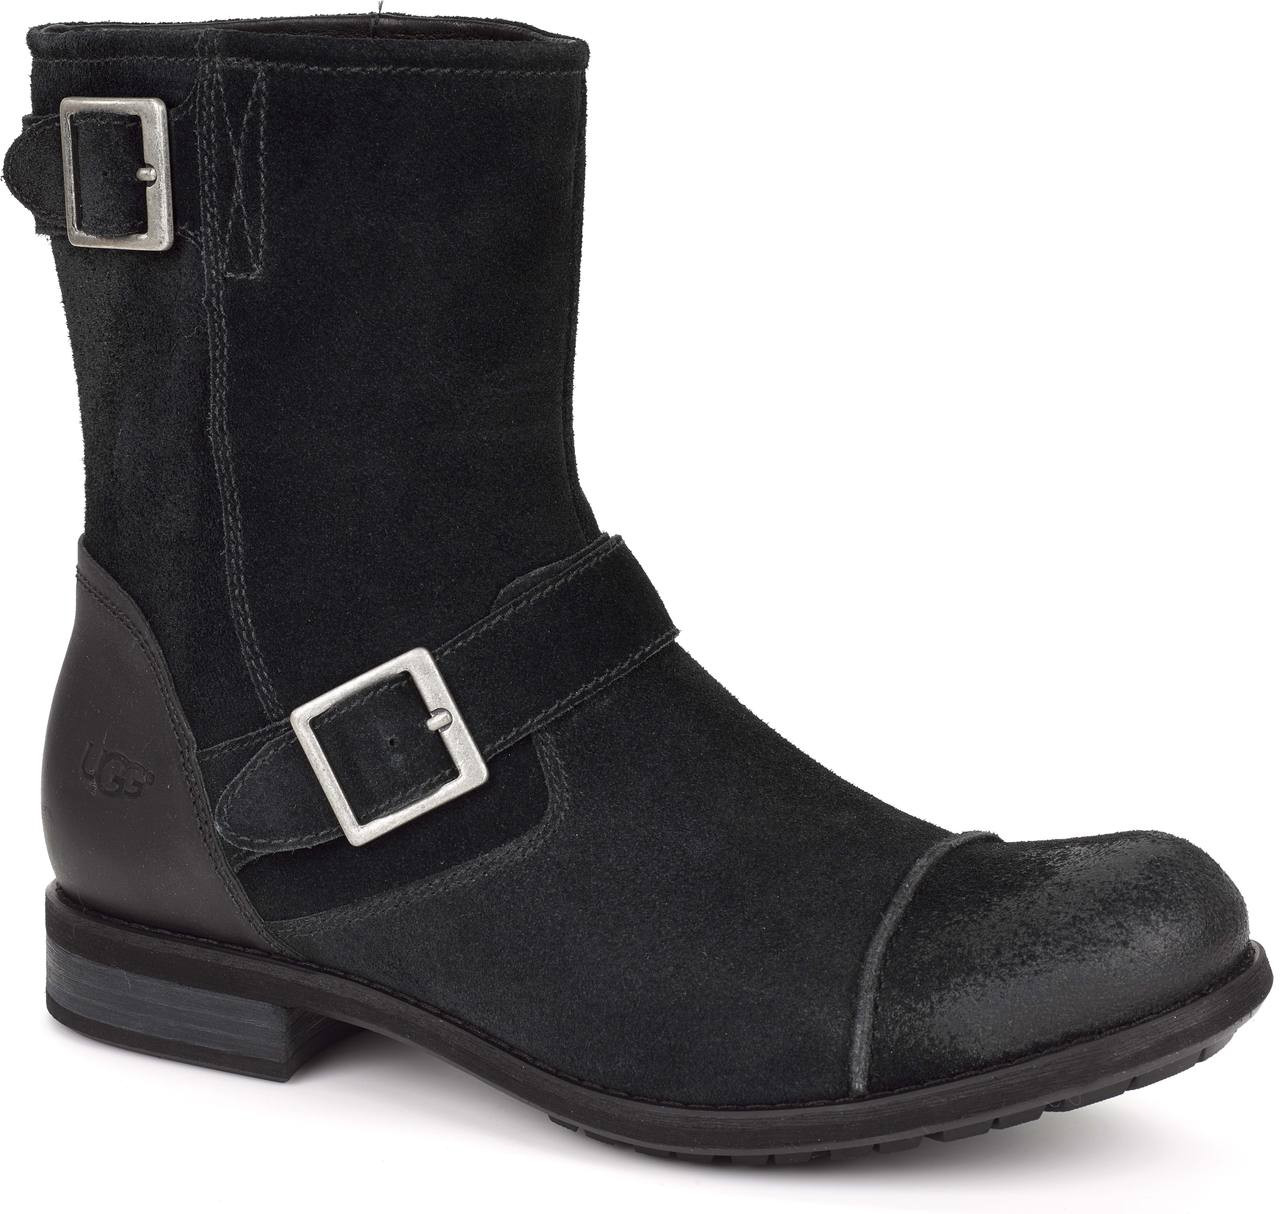 black ugg boots with buckle